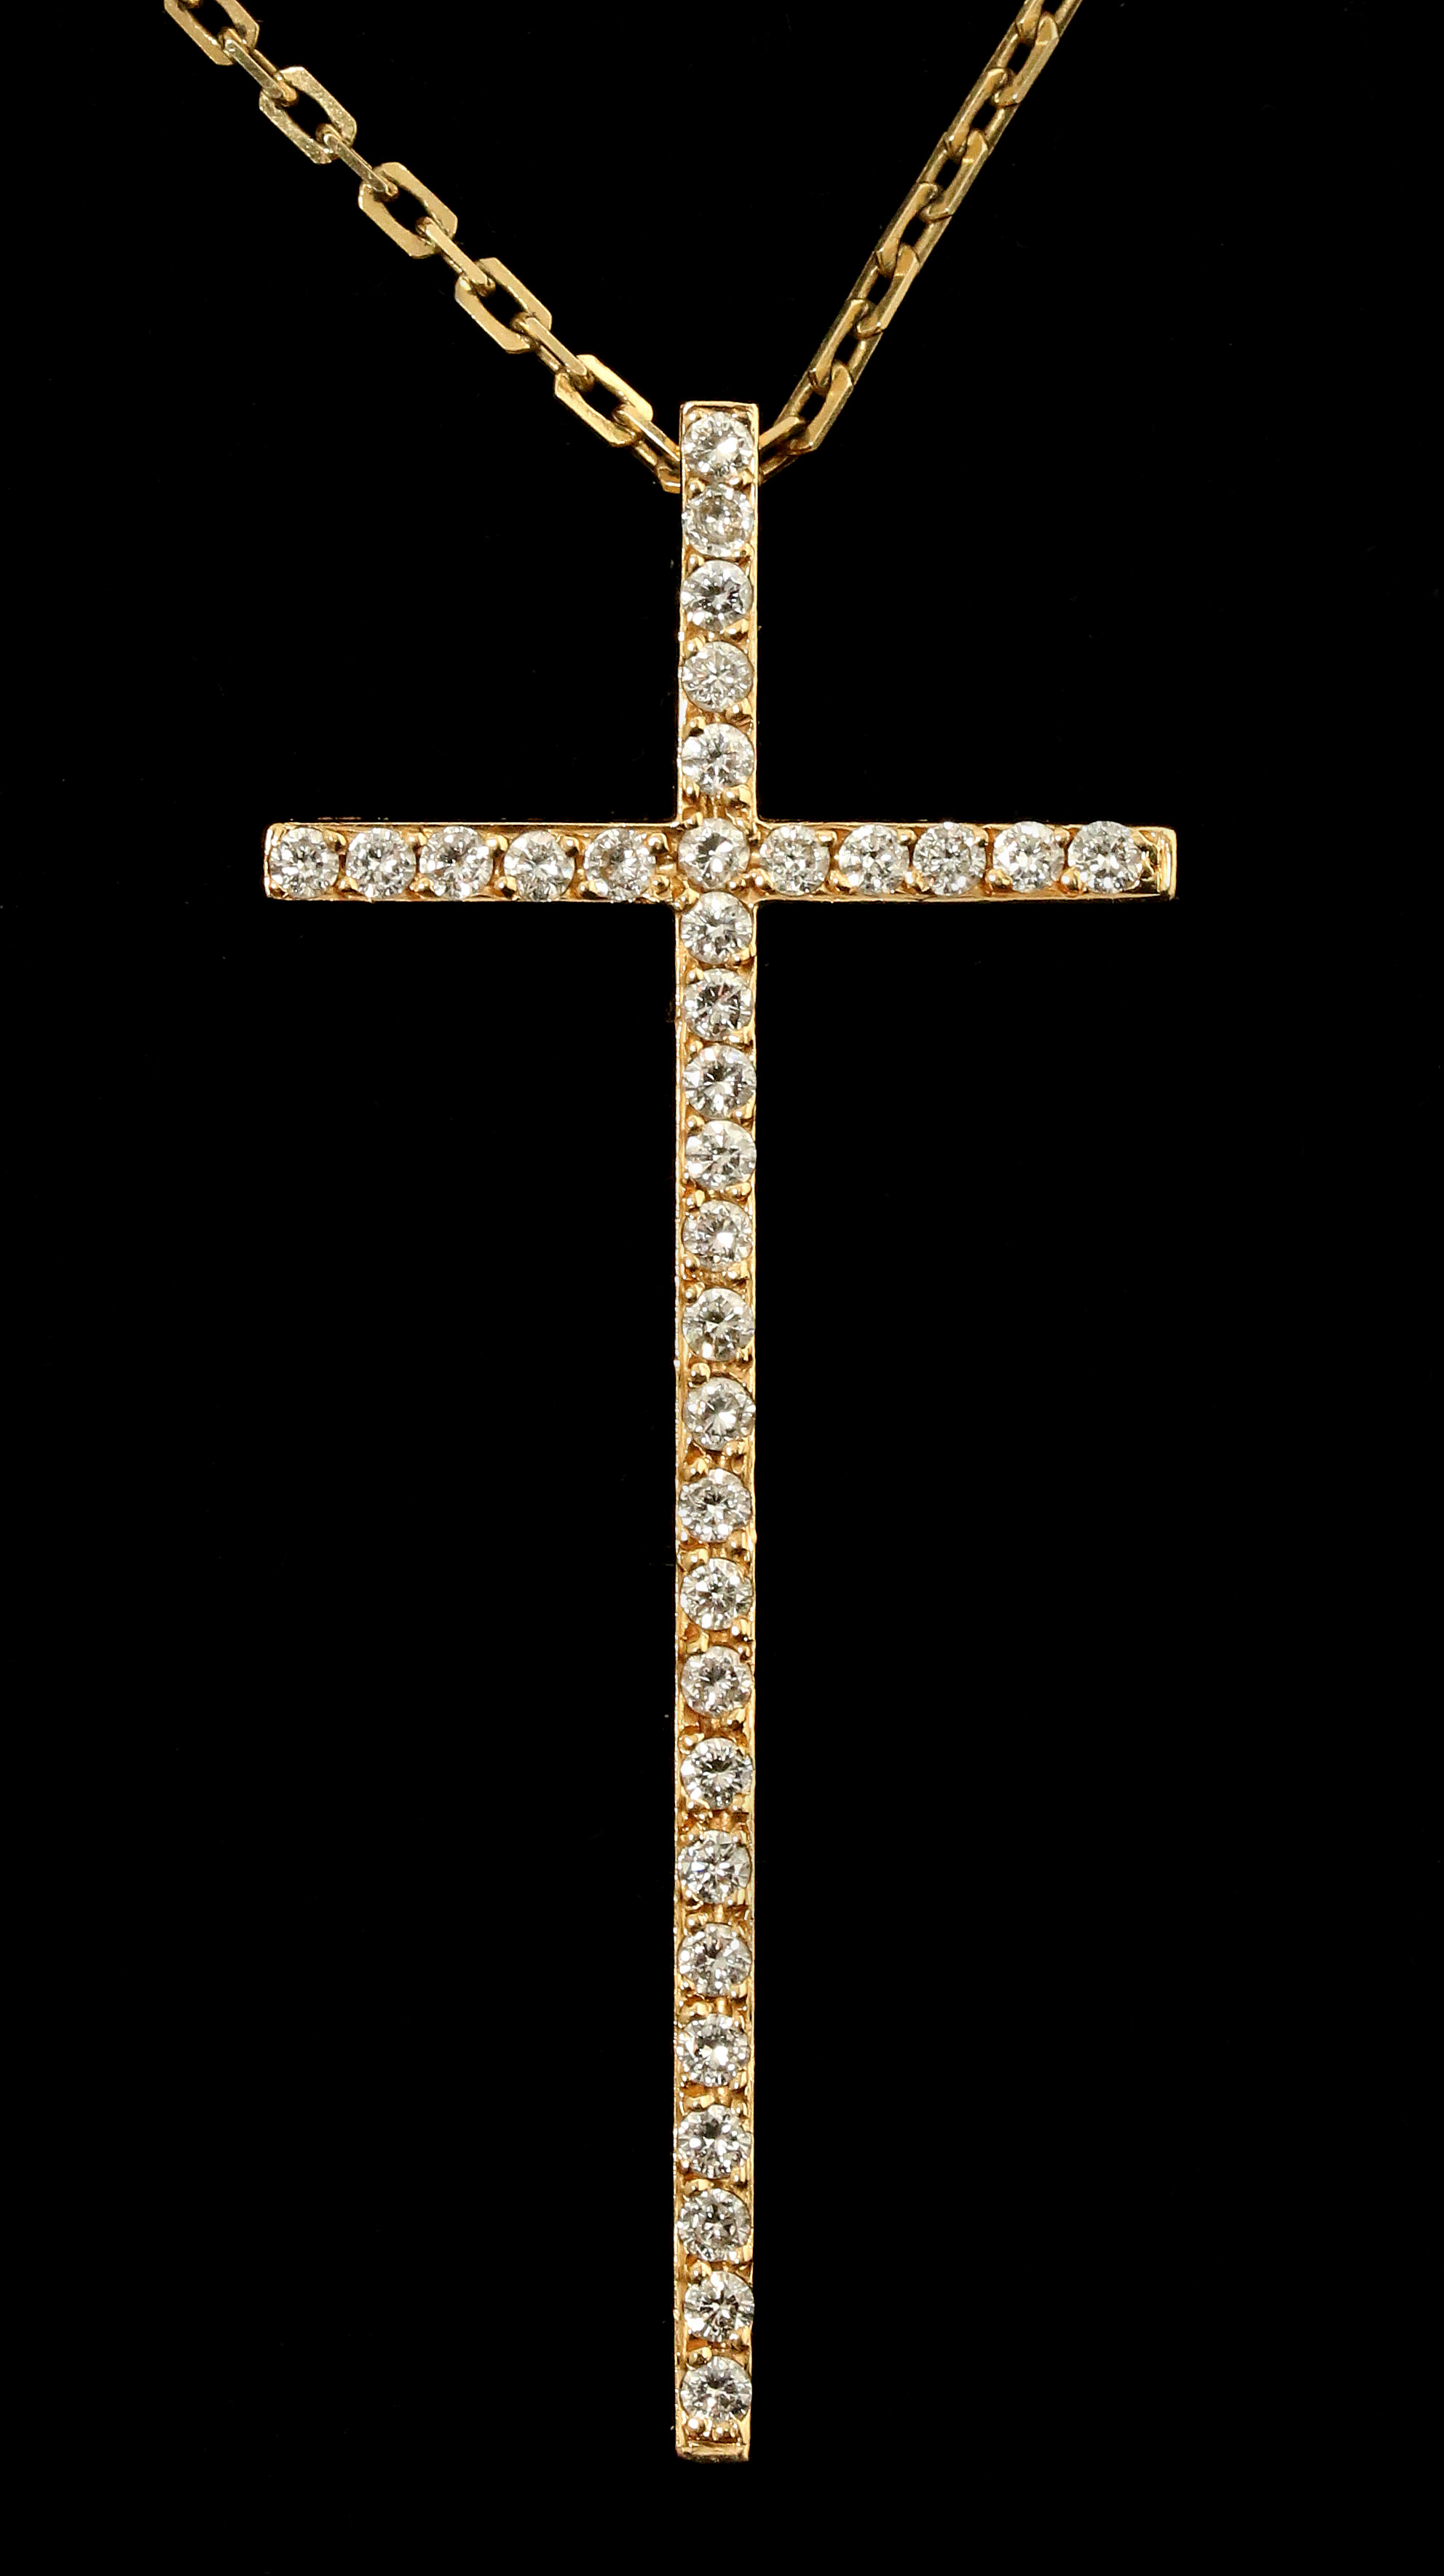 AN 18K YELLOW GOLD CROSS WITH PAVE DIAMONDS